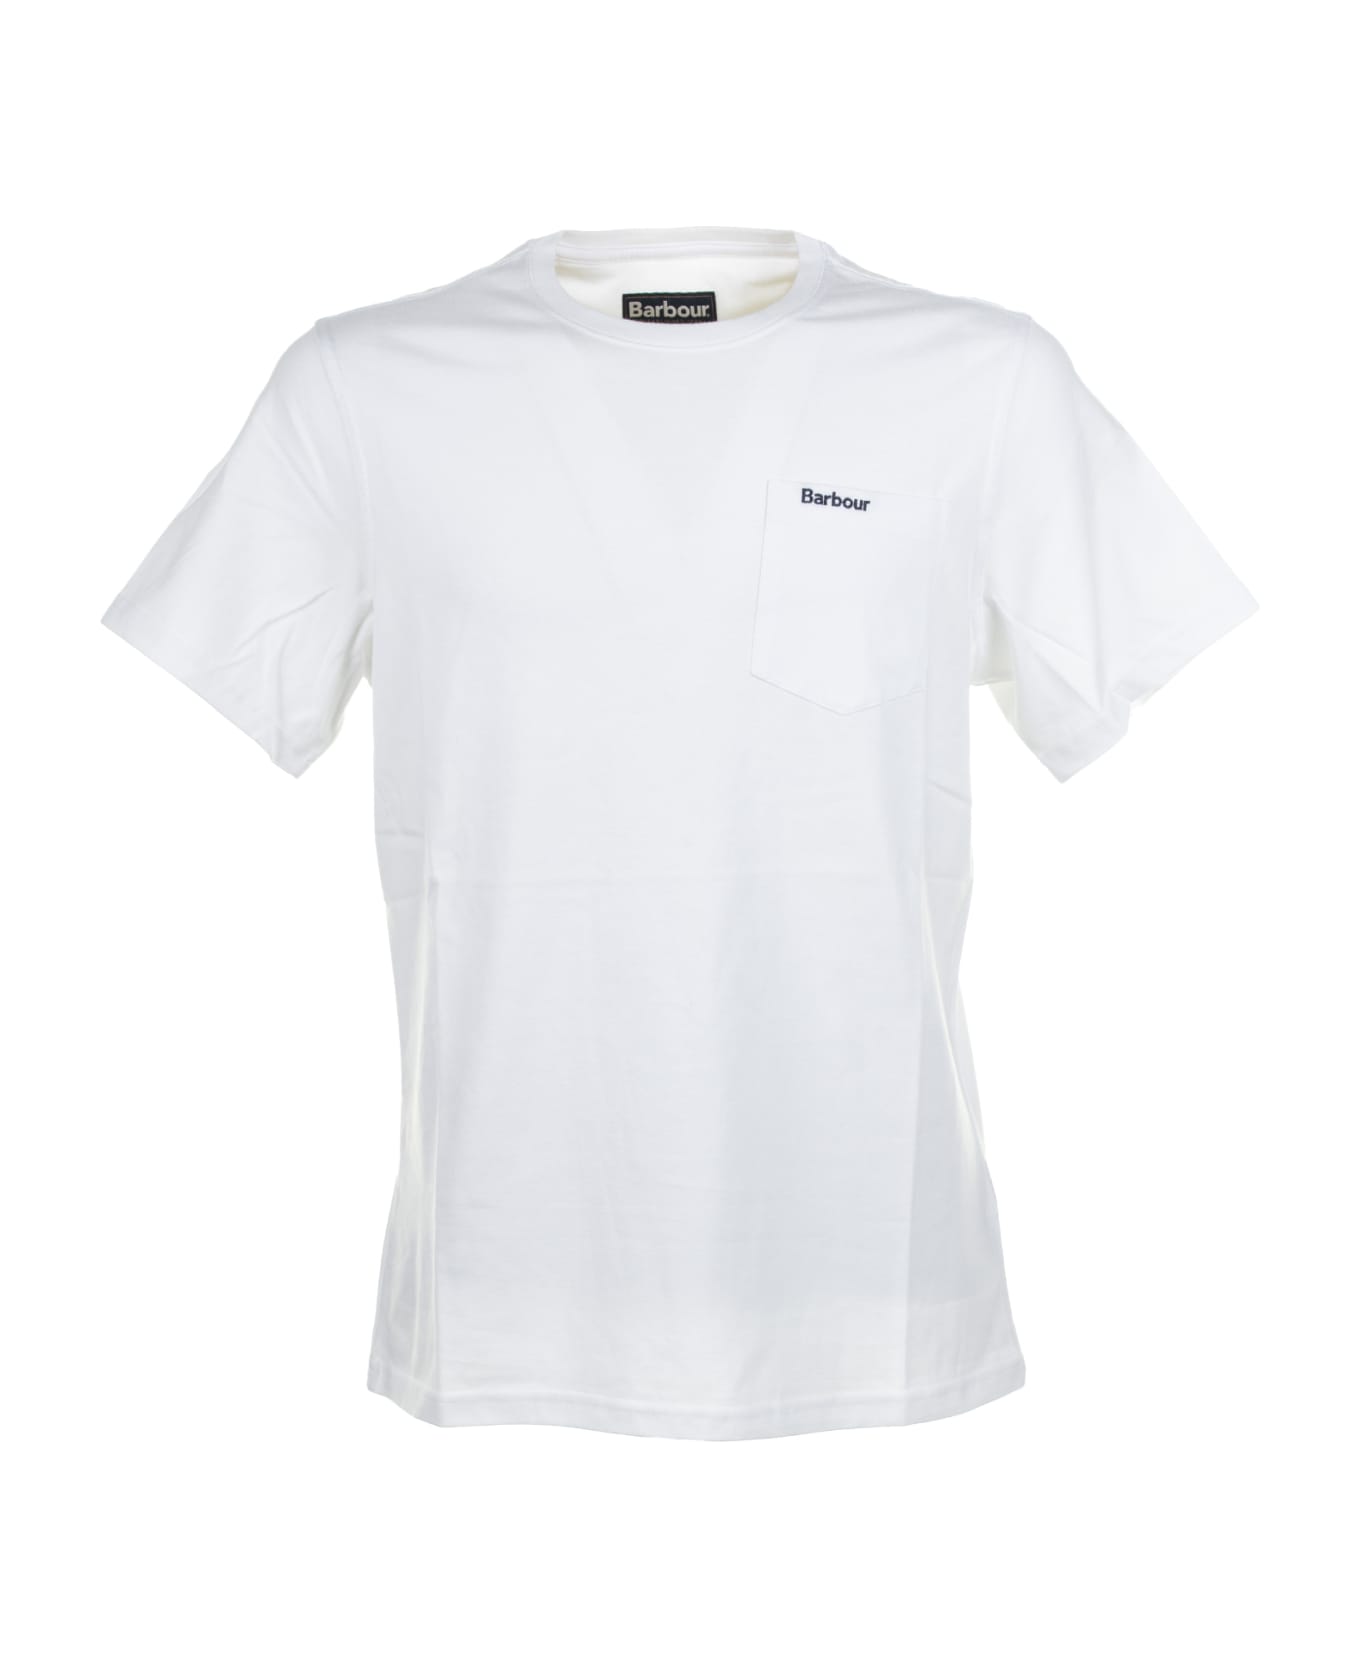 Barbour White T-shirt With Pocket And Logo - WHITE シャツ